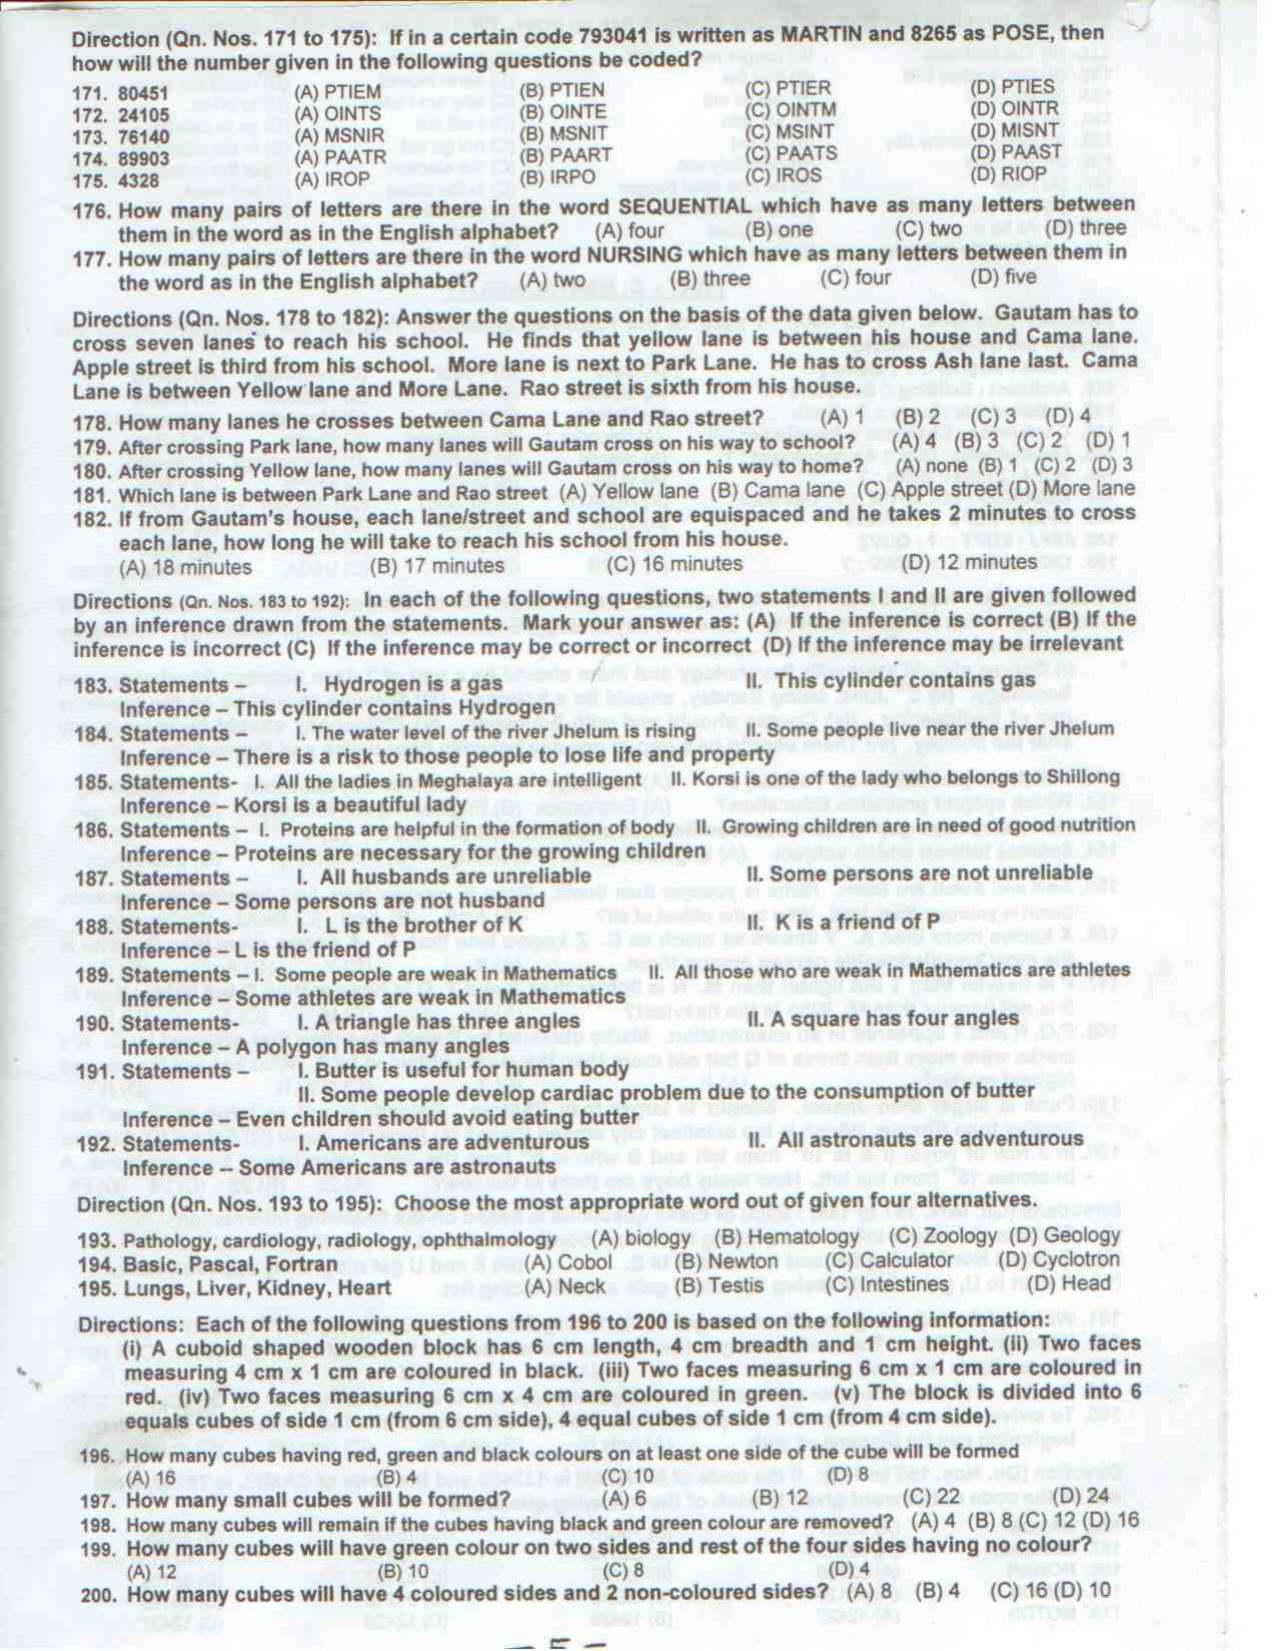 TS EAMCET 2010 Lok-Rajya Sabha: Security Assistant Grade-II Question Paper with Key (1 August 2010 Held on) - Page 5